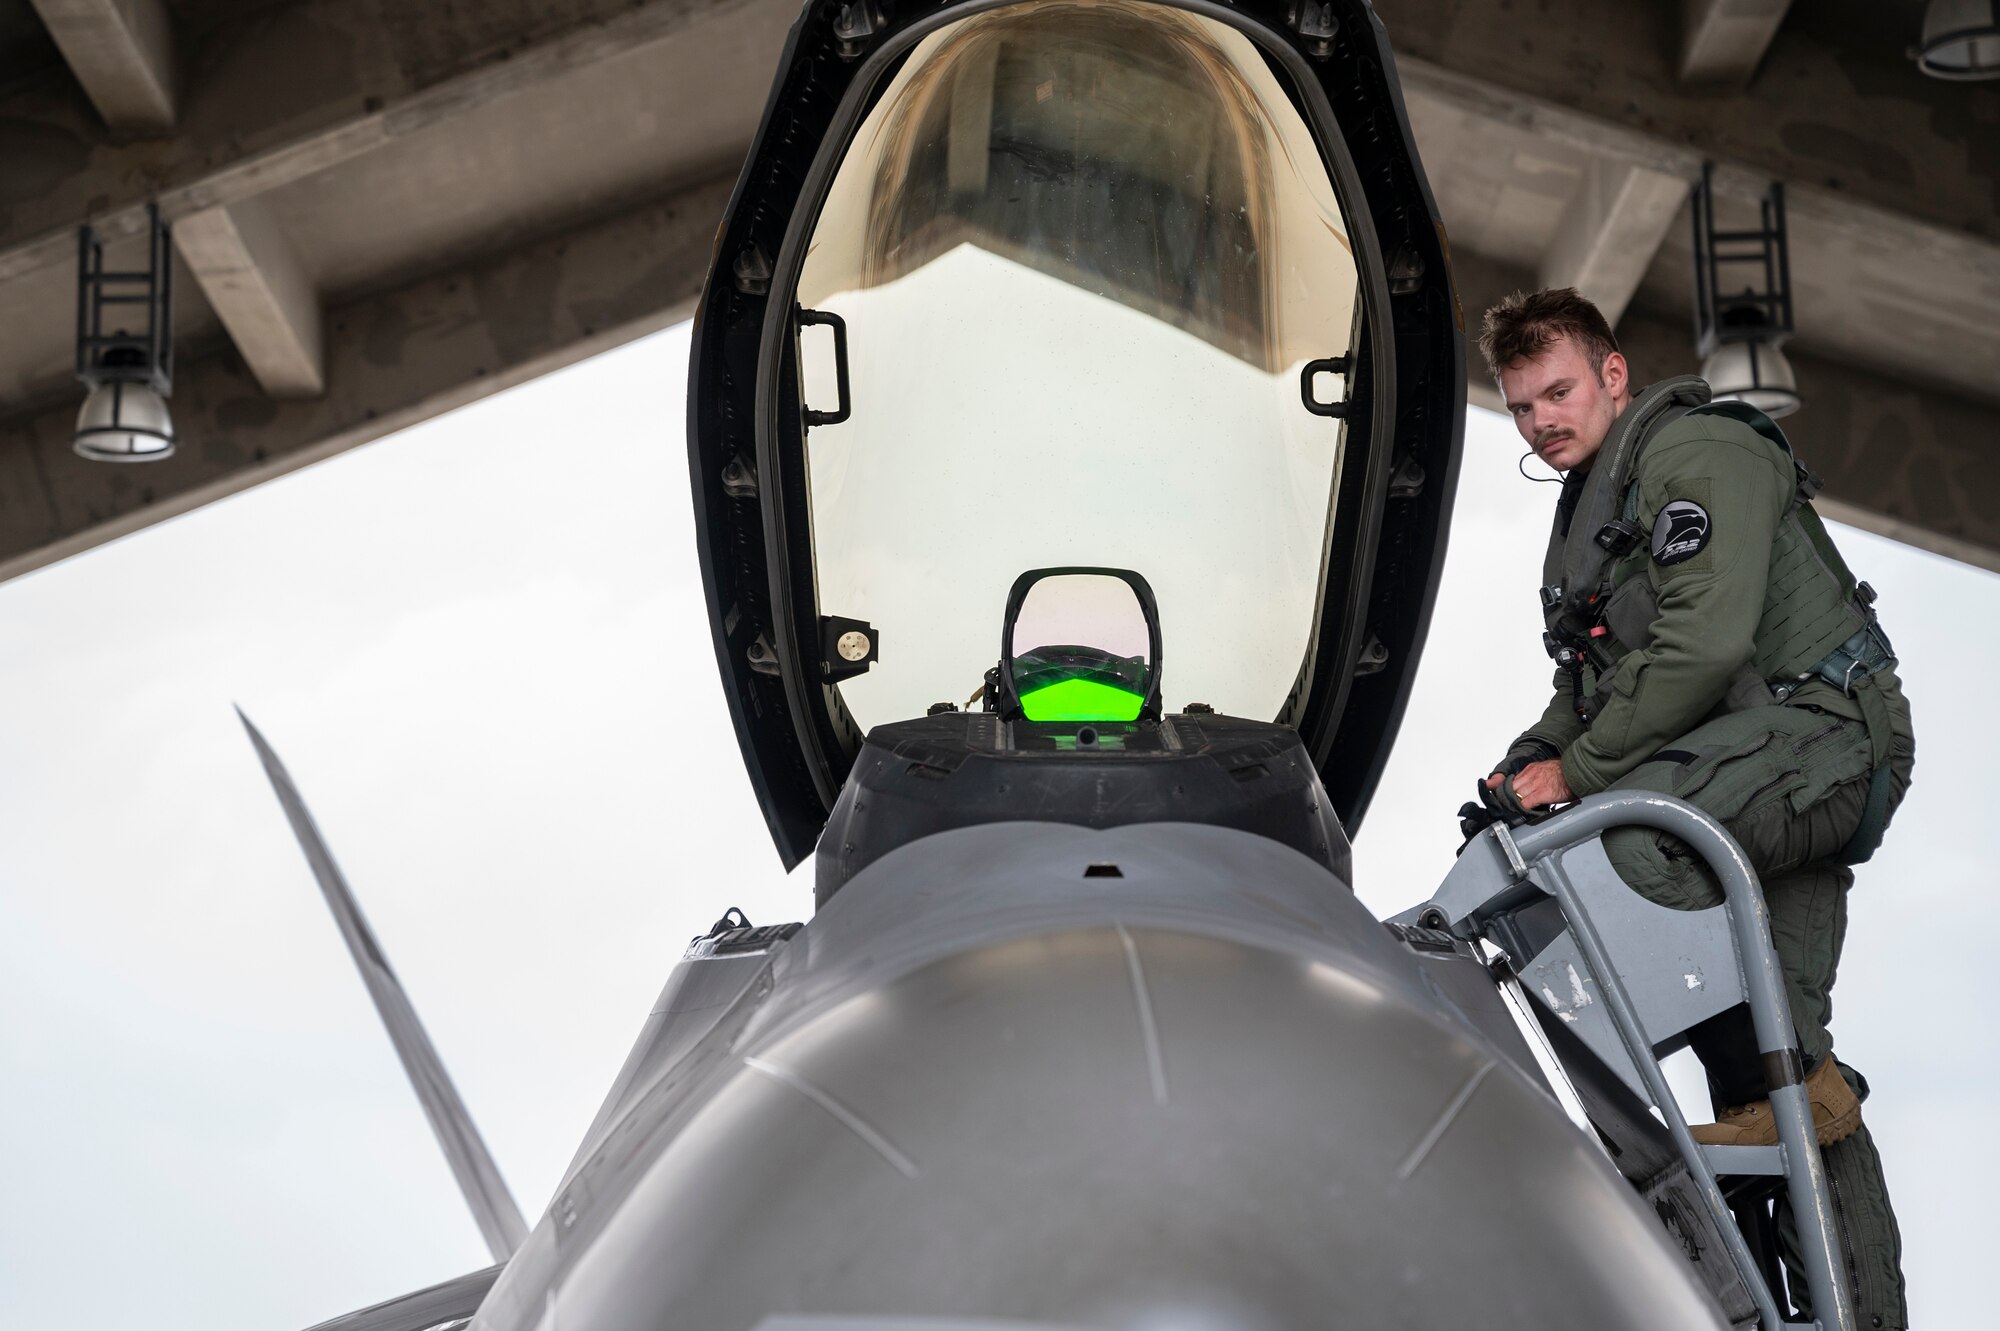 A U.S. Air Force F-22 Raptor pilot assigned to the 525th Fighter Squadron descends from the cockpit after arriving as part of a temporary deployment at Kadena Air Base, Japan, Nov. 8, 2022. The deployment of newer and more advanced aircraft at Kadena exemplifies the Department of Defense's continued commitment to enhancing our posture while building on the strong foundation of our Alliance With Japan. (U.S. Air Force photo by Senior Airman Jessi Roth)